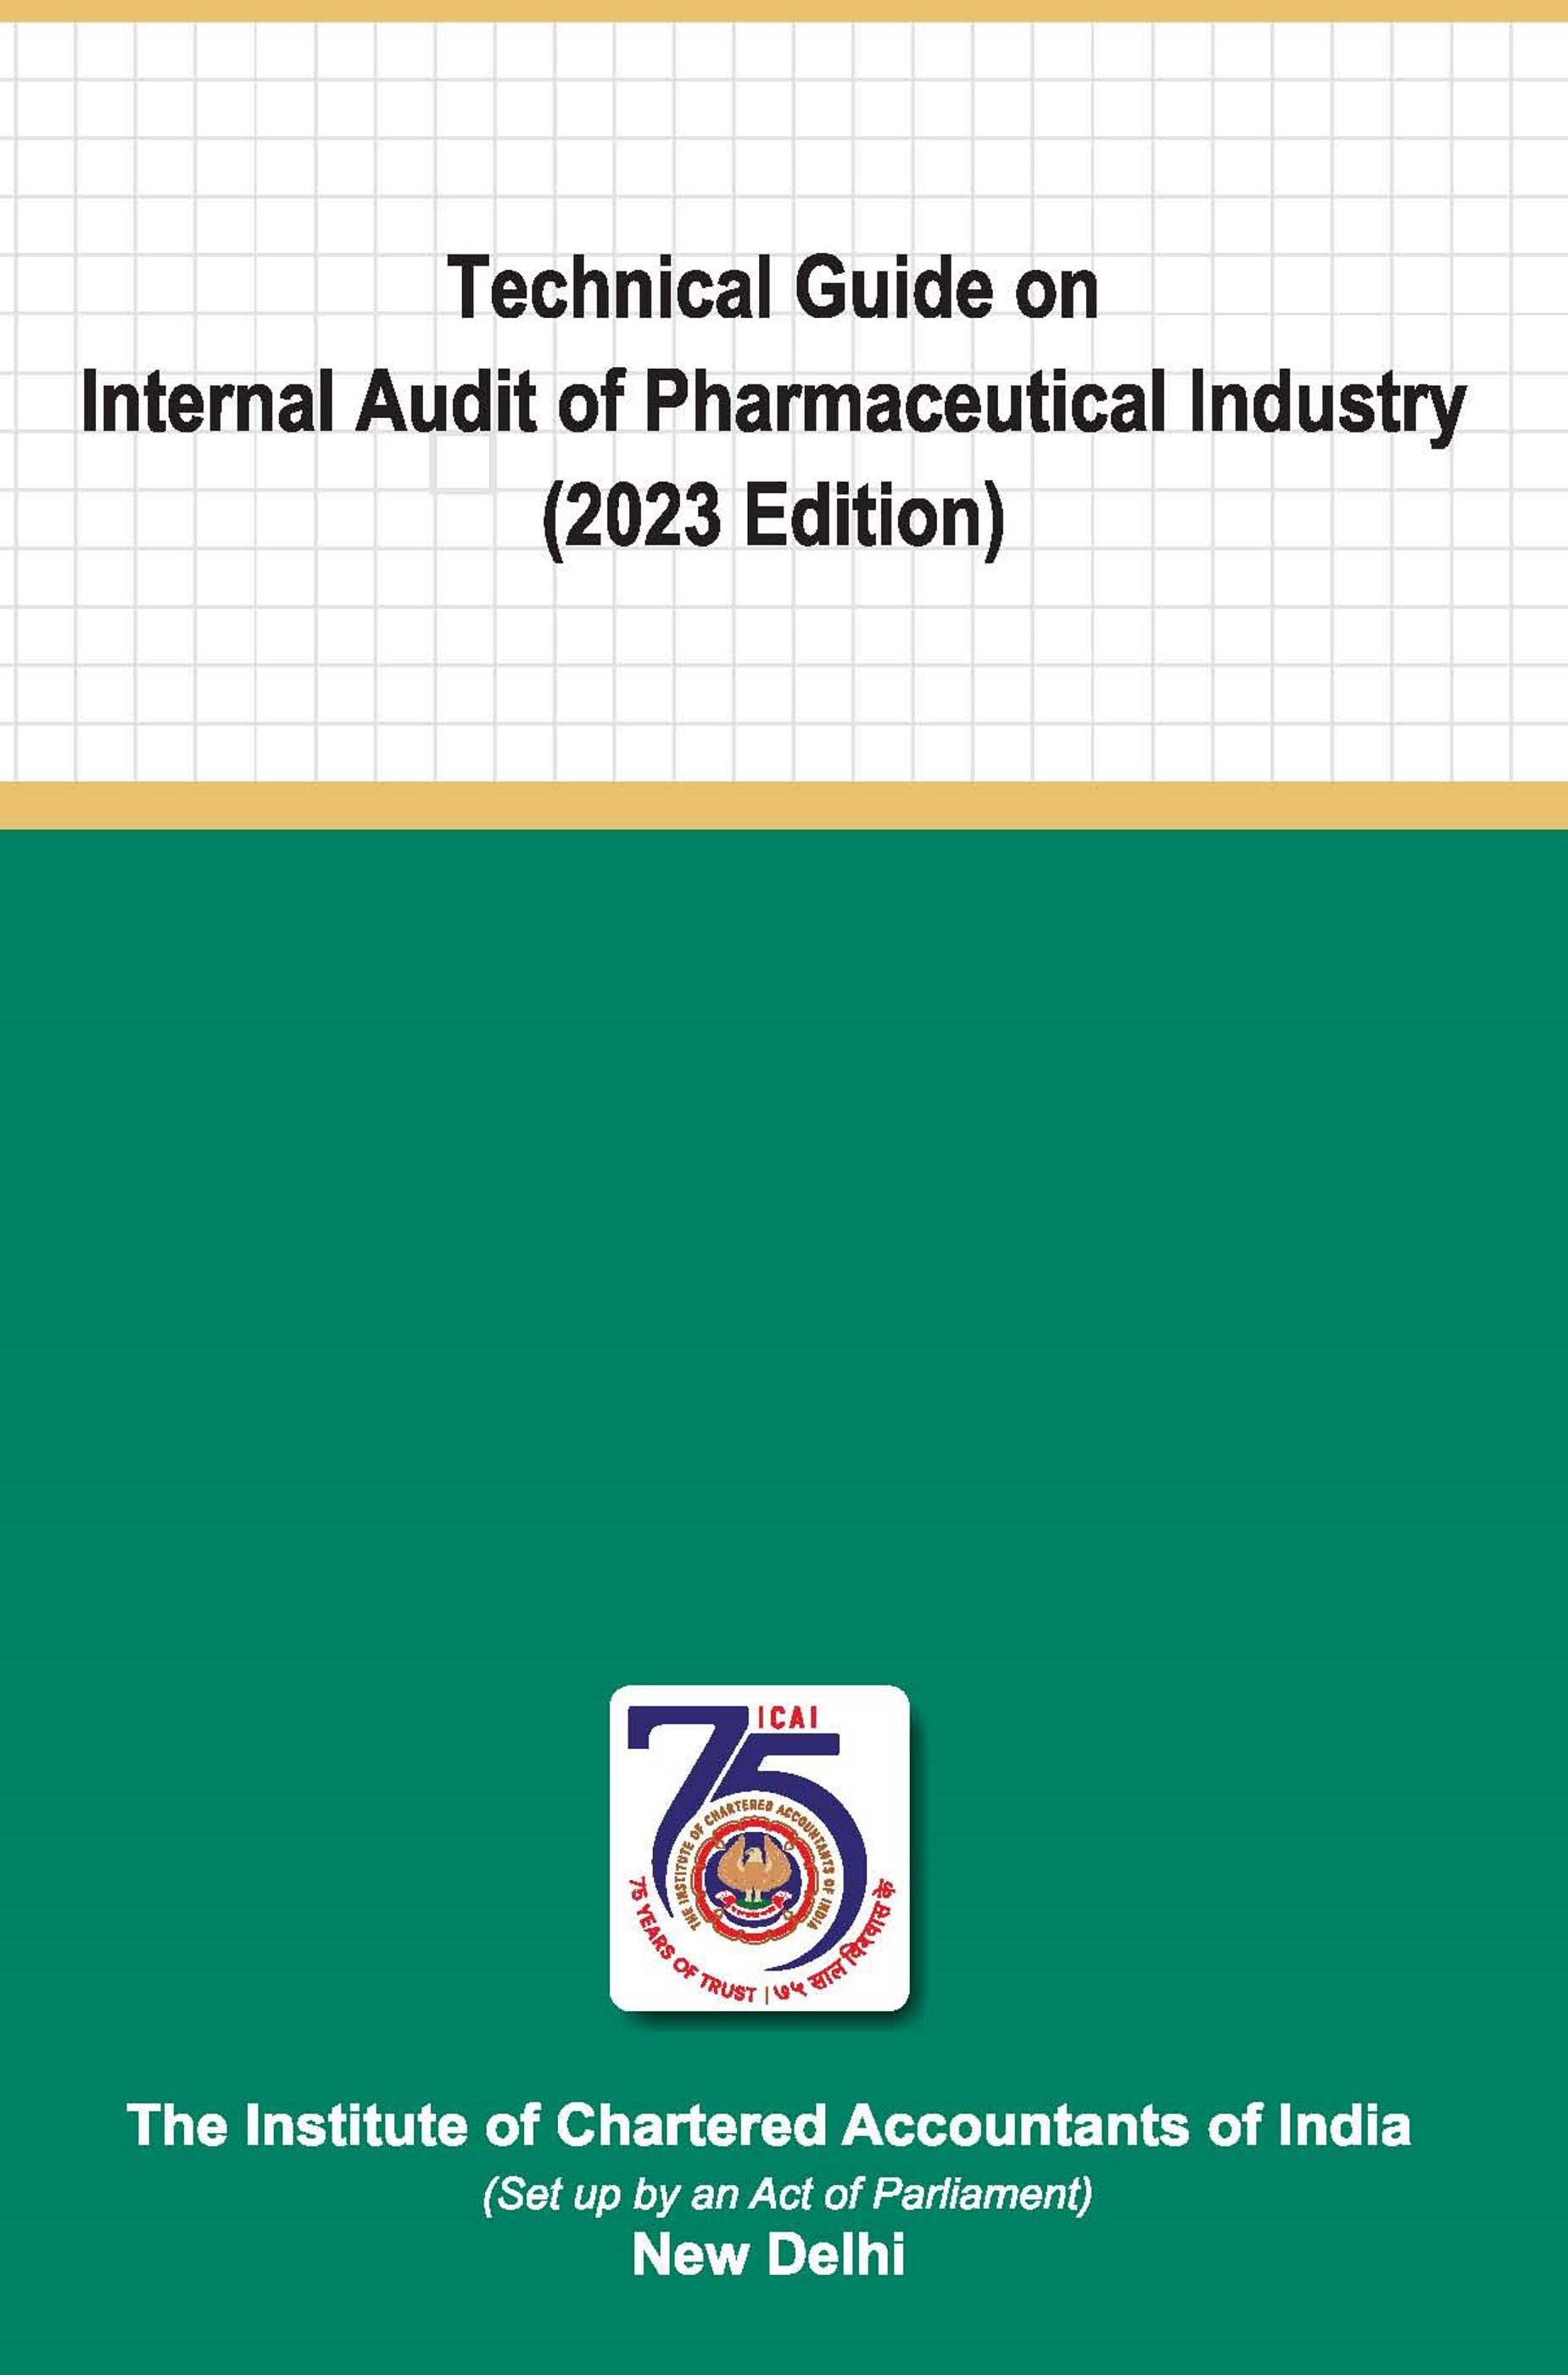 Technical Guide on Internal Audit of Pharmaceutical Industry (2023 Edition)